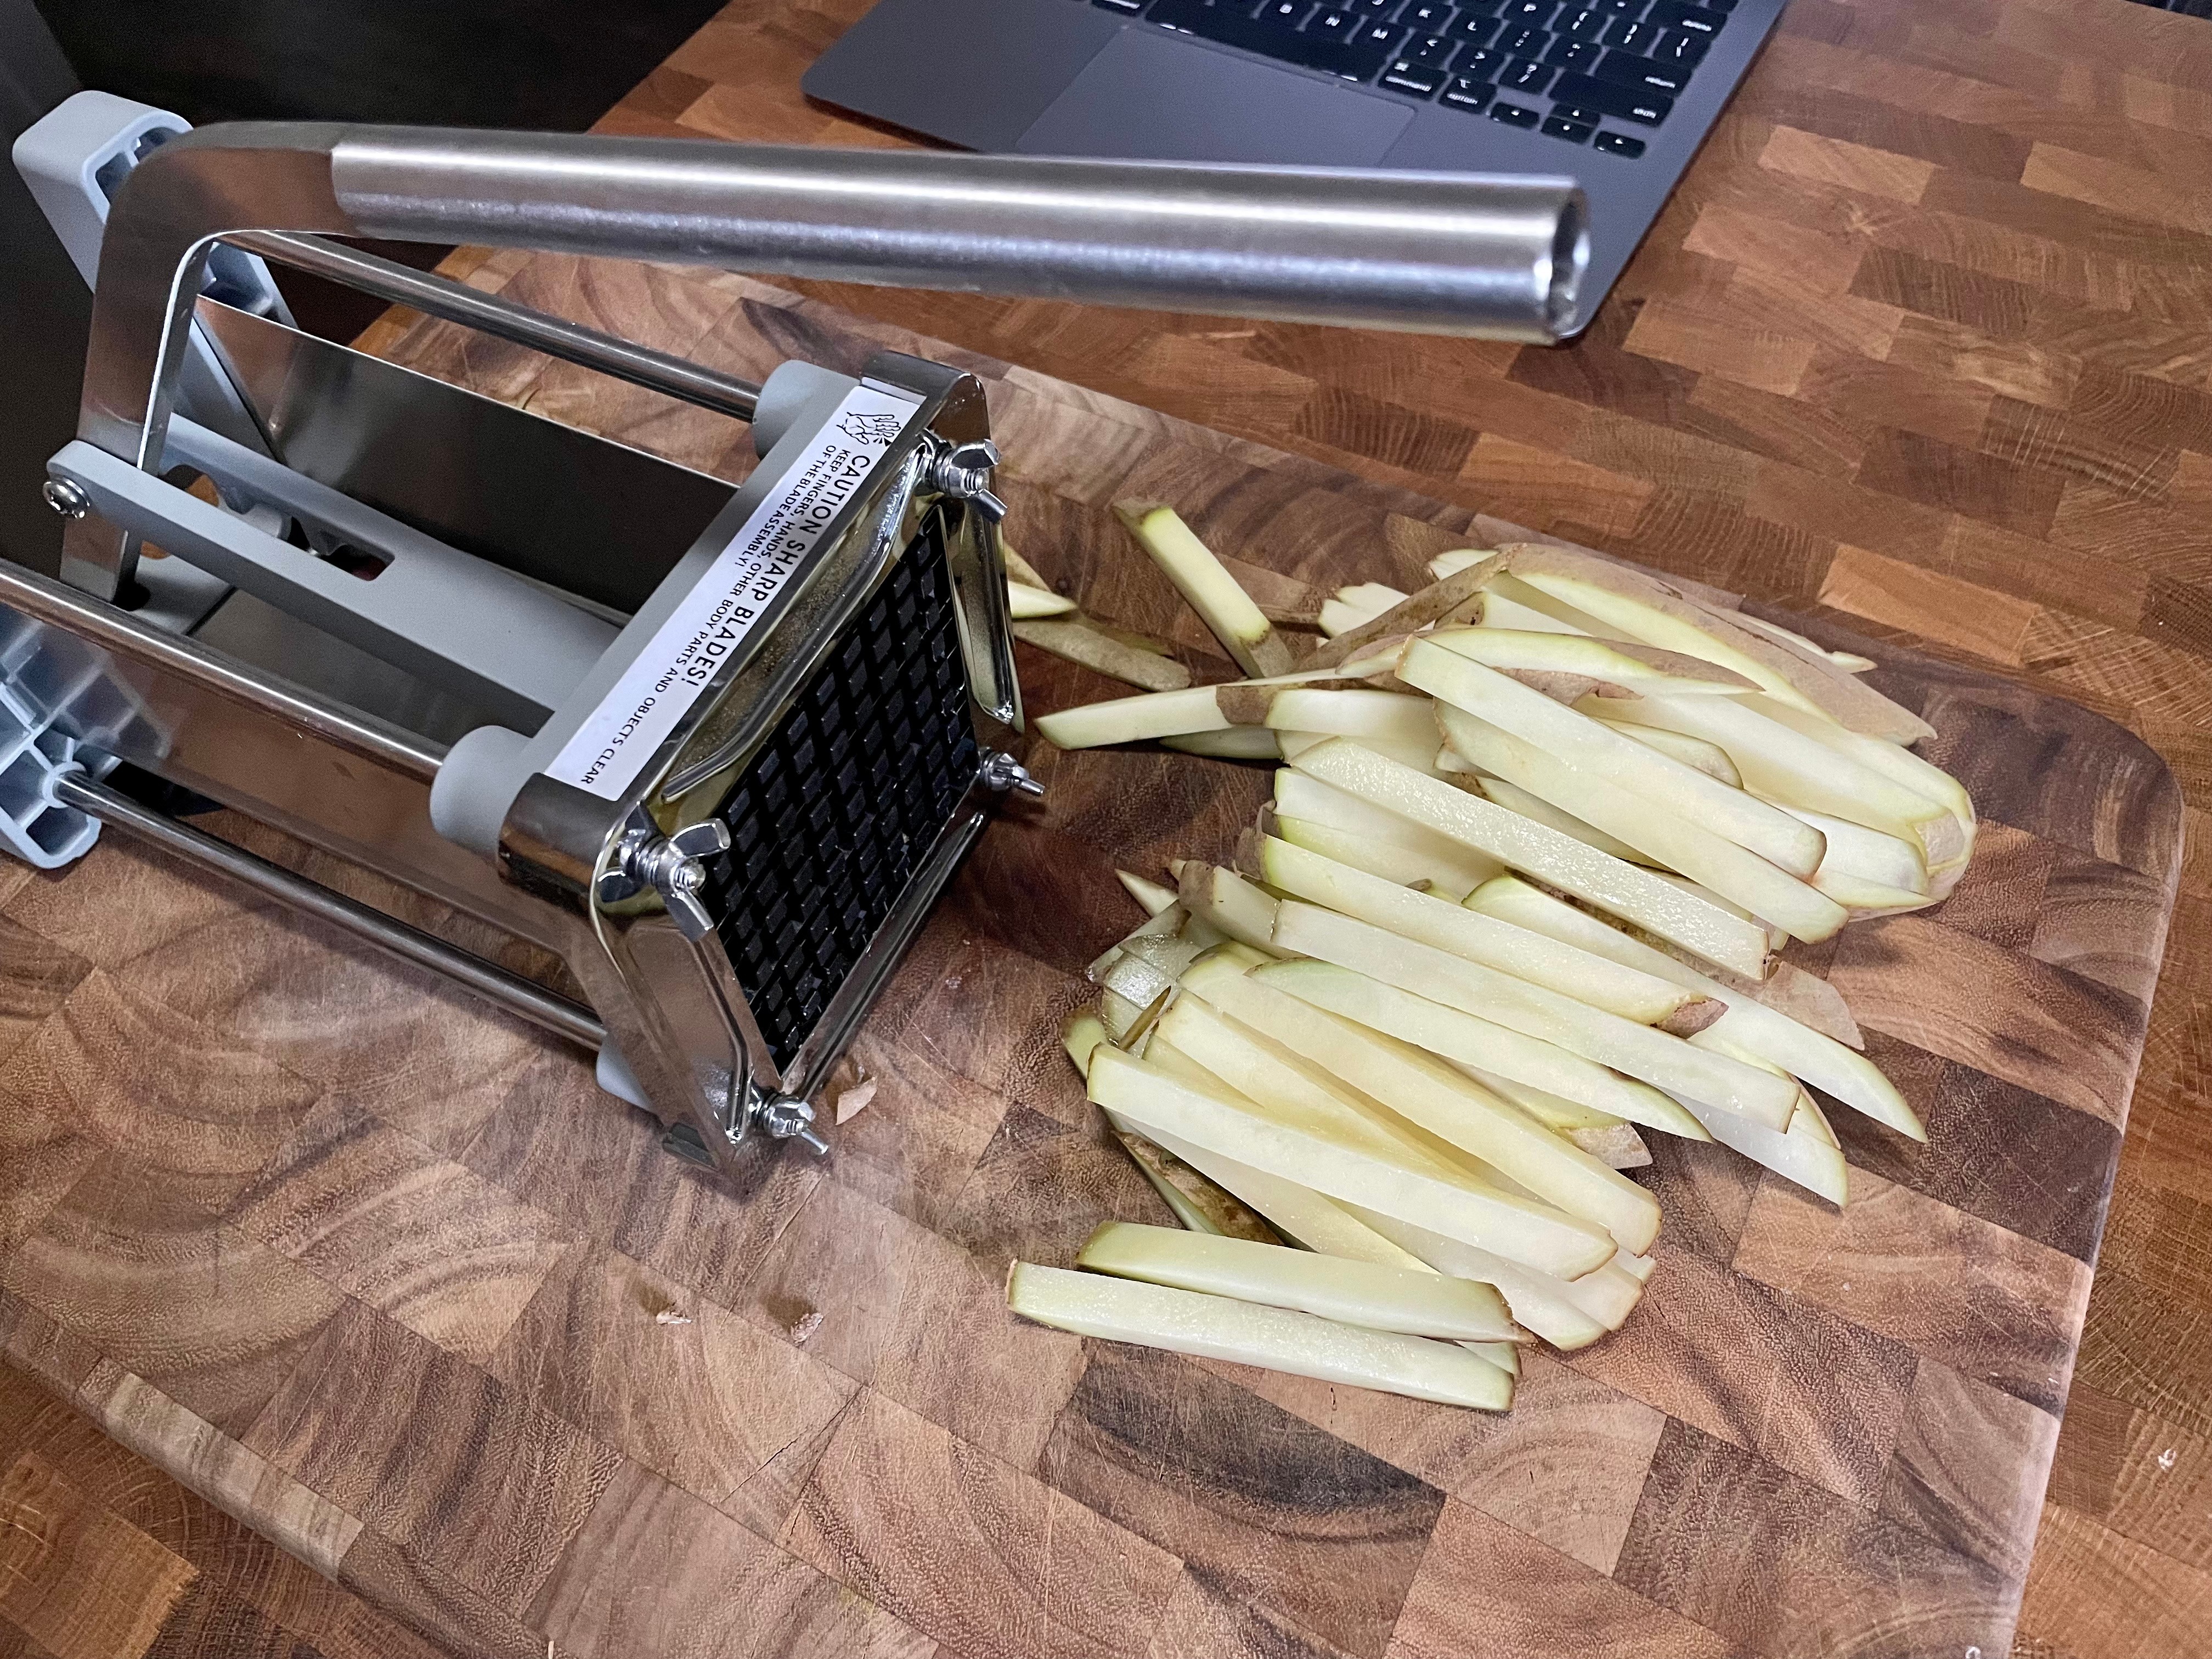 Review of the Sopito french fry cutter